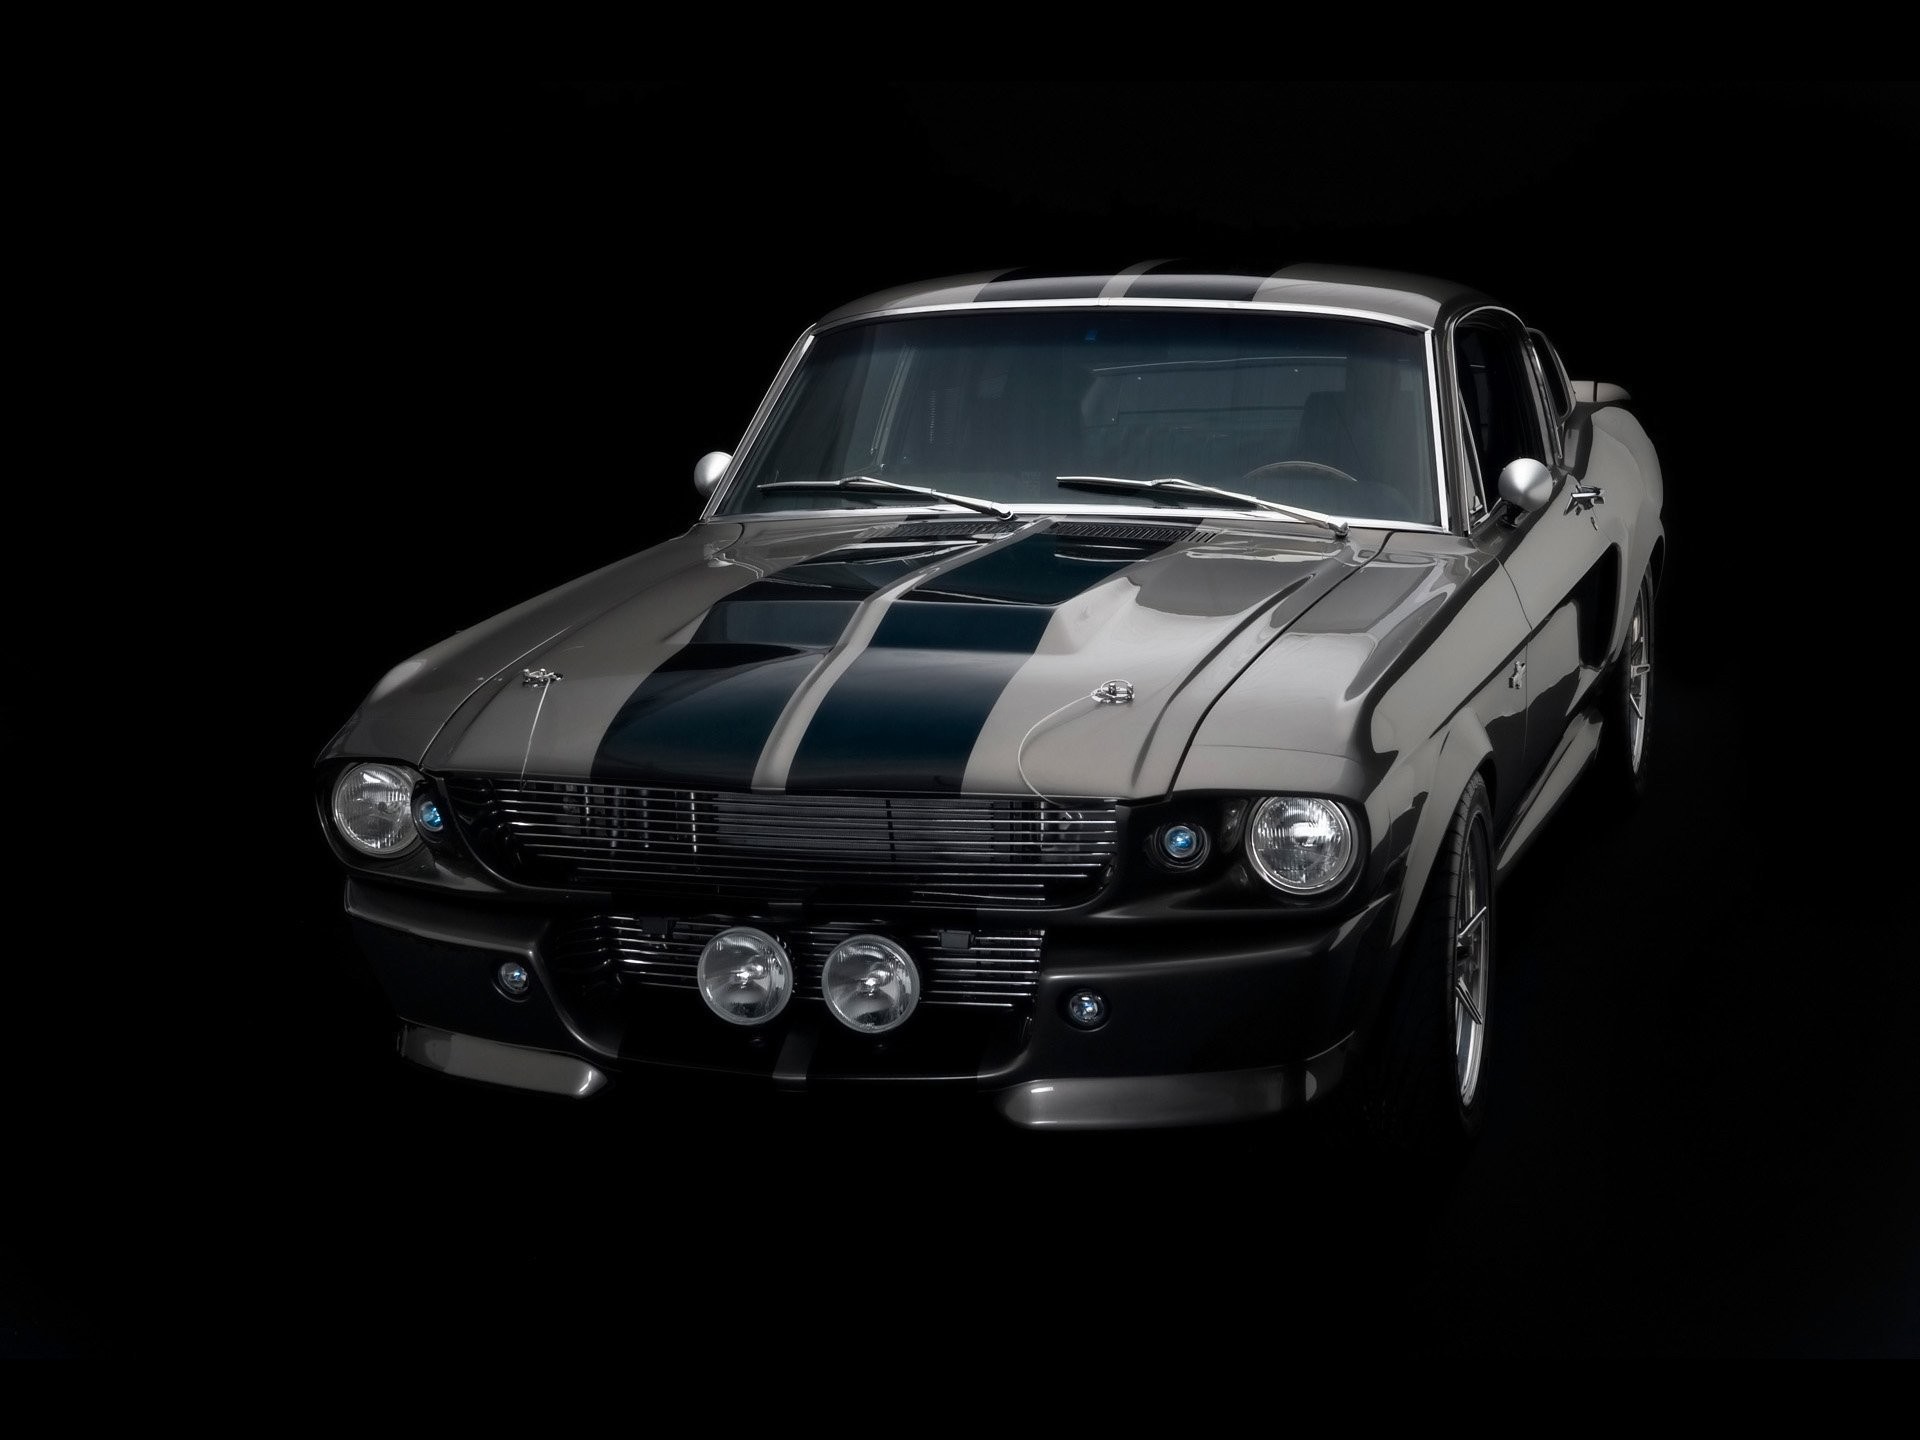 1920x1440 Cars Muscle Eleanor Ford Mustang Shelby Gt500 Wallpaper